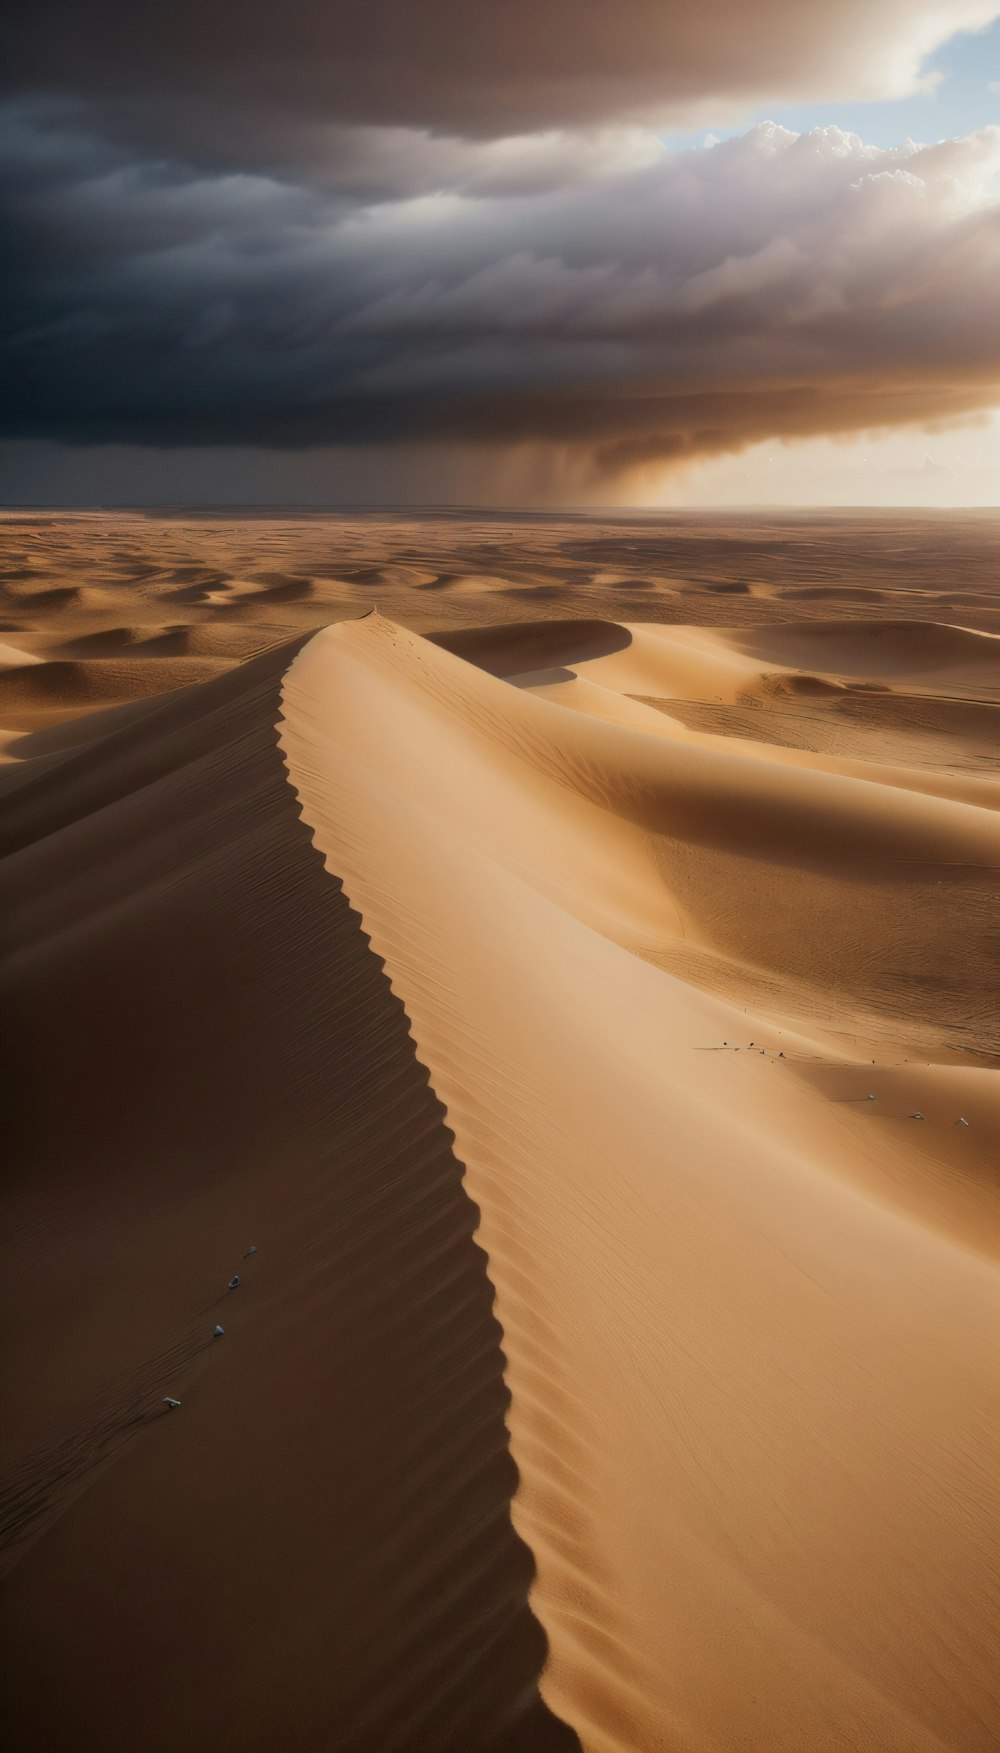 a large sand dune in the desert under a cloudy sky